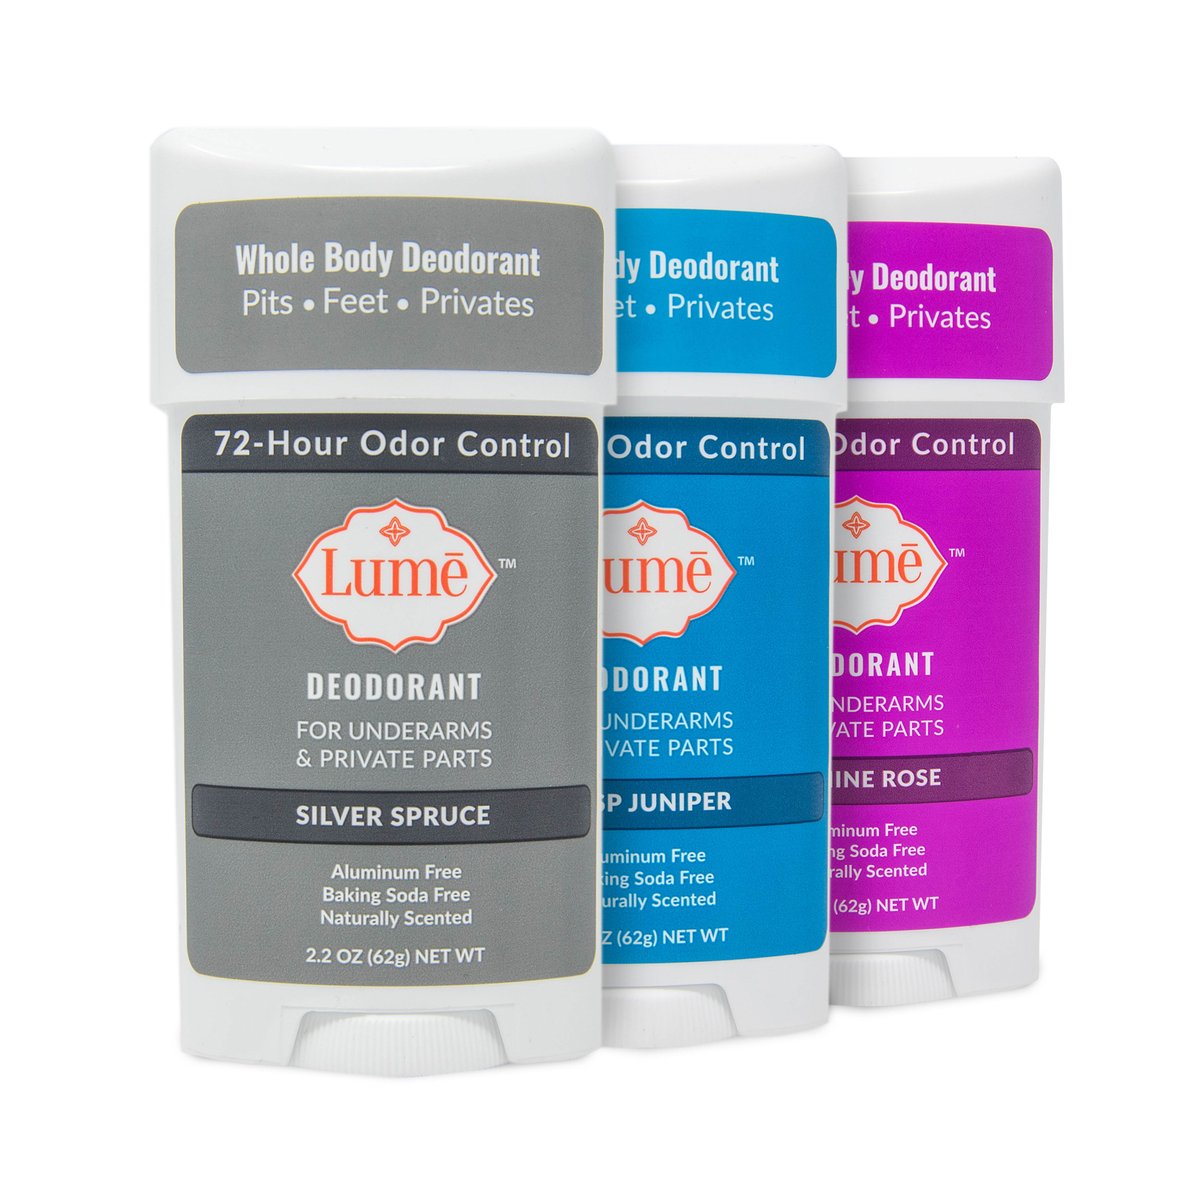 All Natural Bar Soap Trio by Lume'